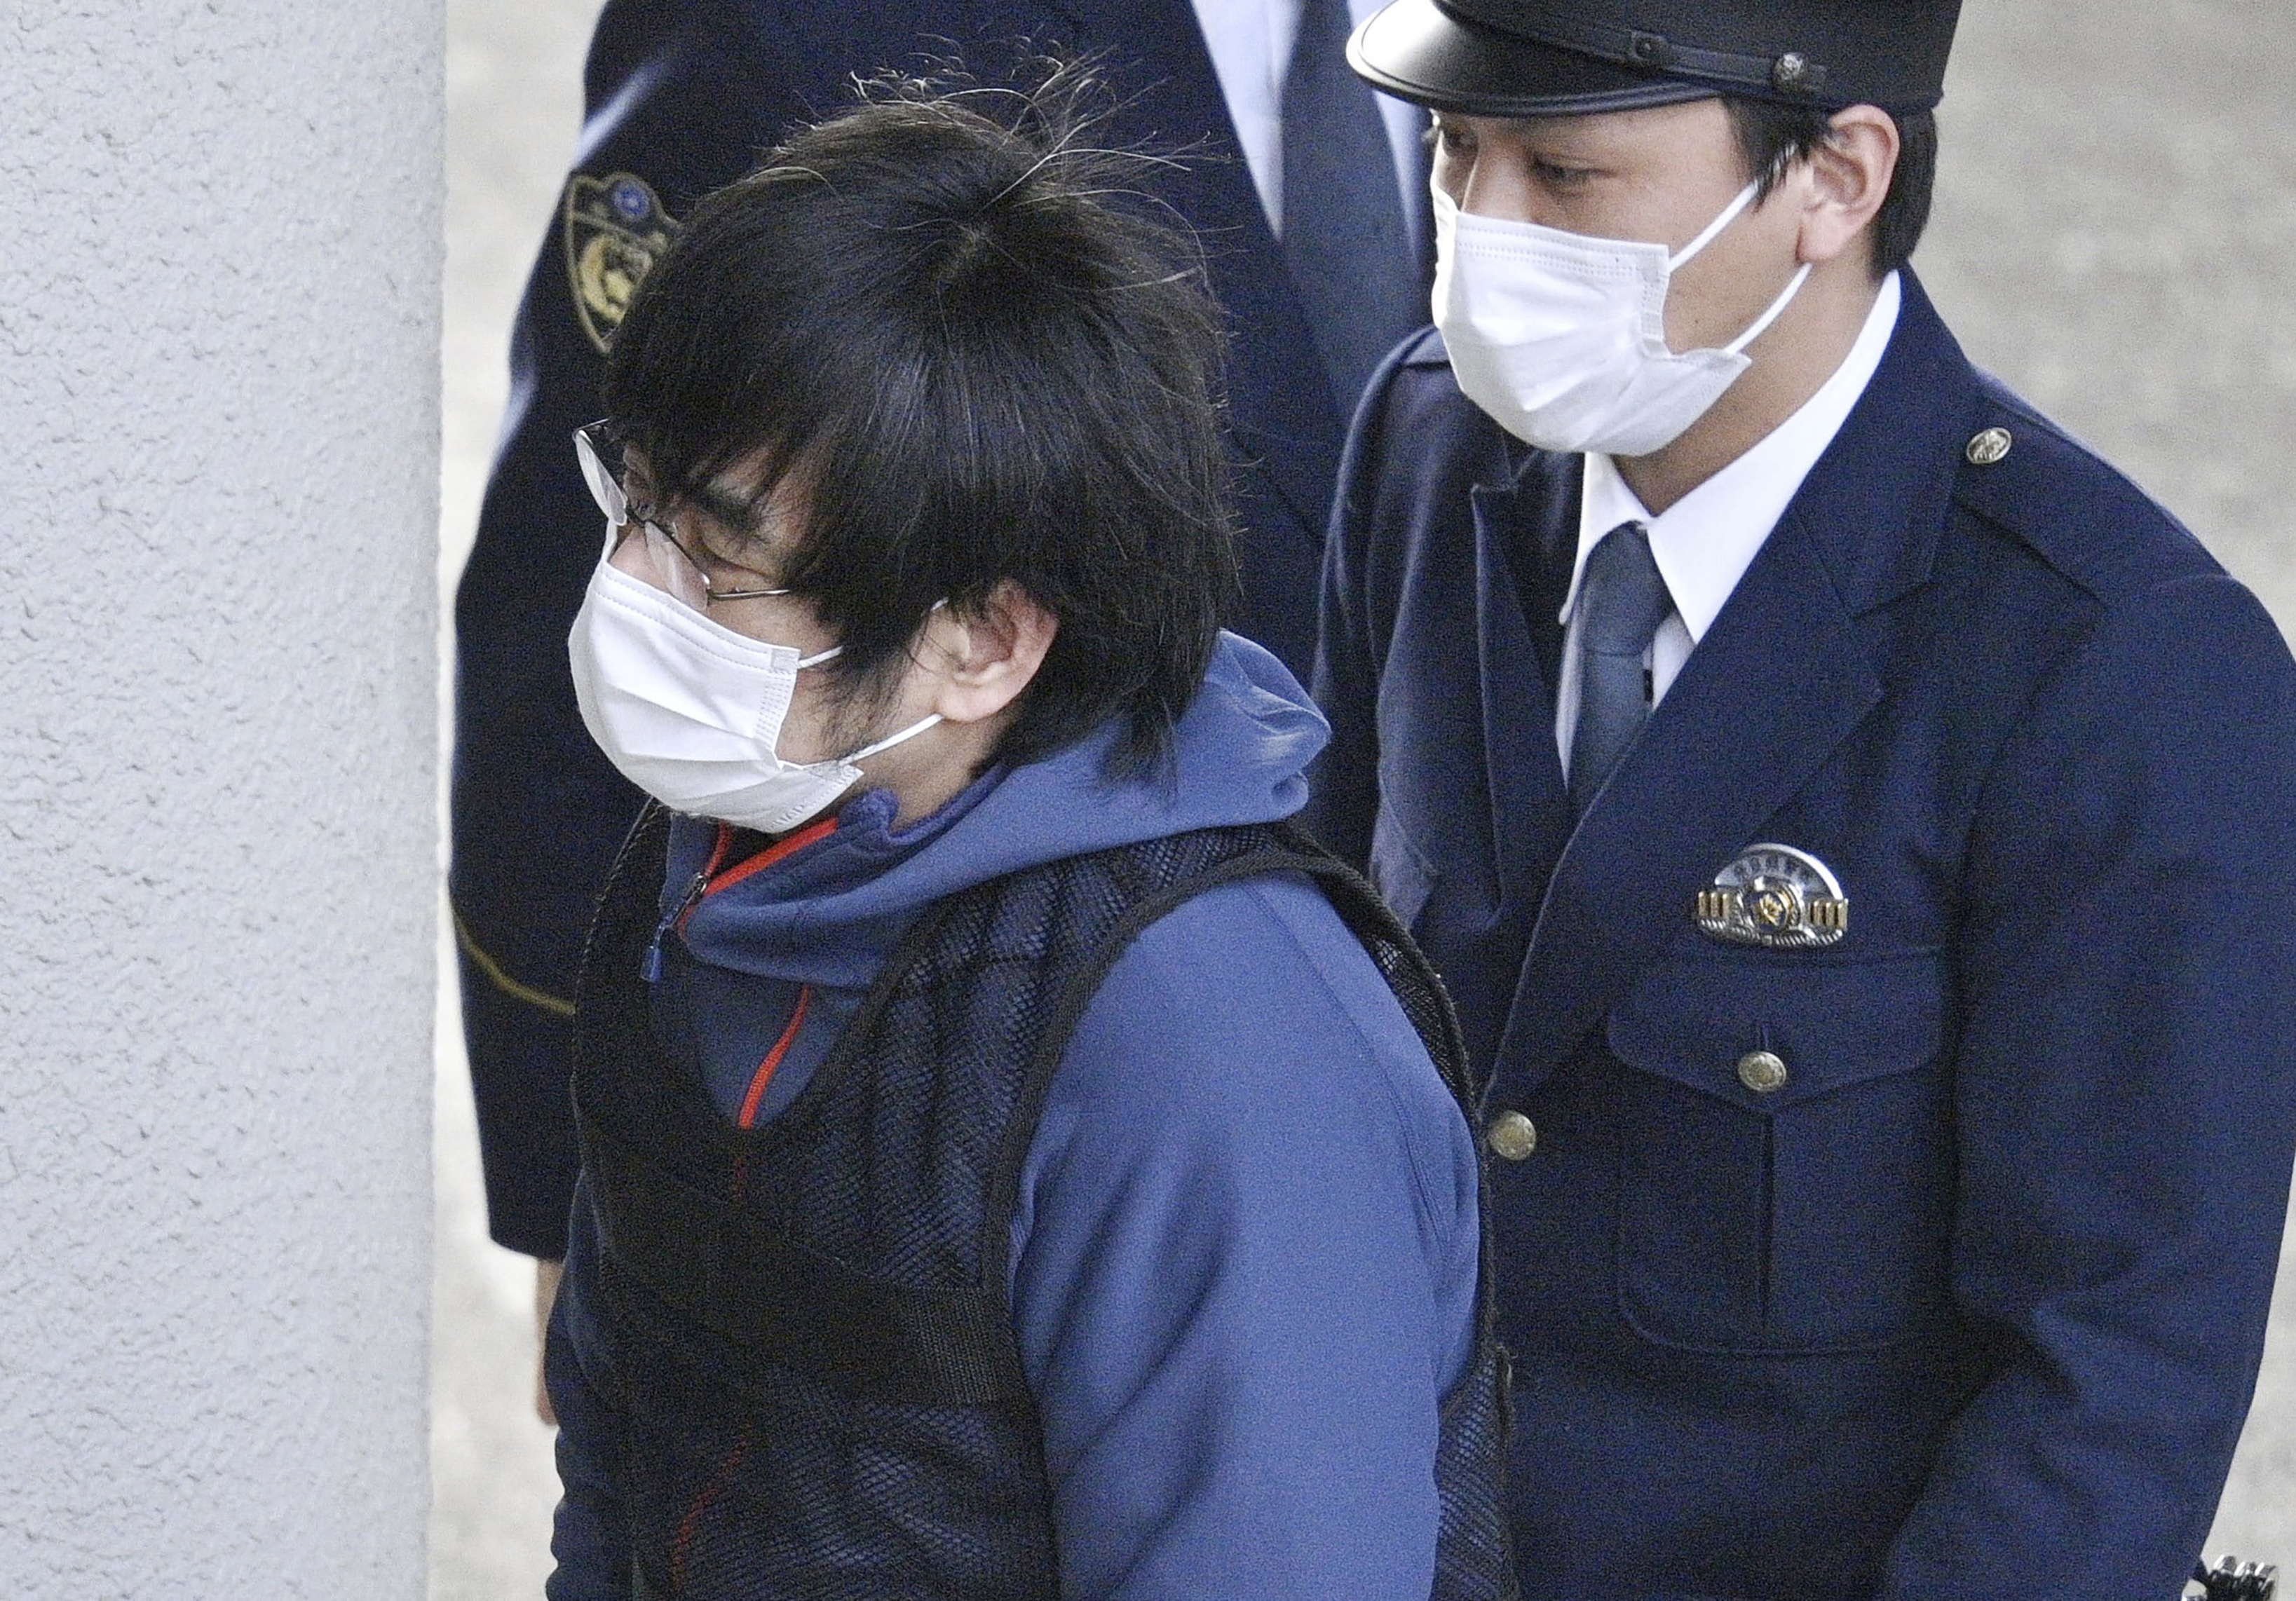 Tetsuya Yamagami, the alleged assassin of Japan's former Prime Minister Shinzo Abe, enters a police station in Nara, western Japan, on Jan. 10, 2023.  